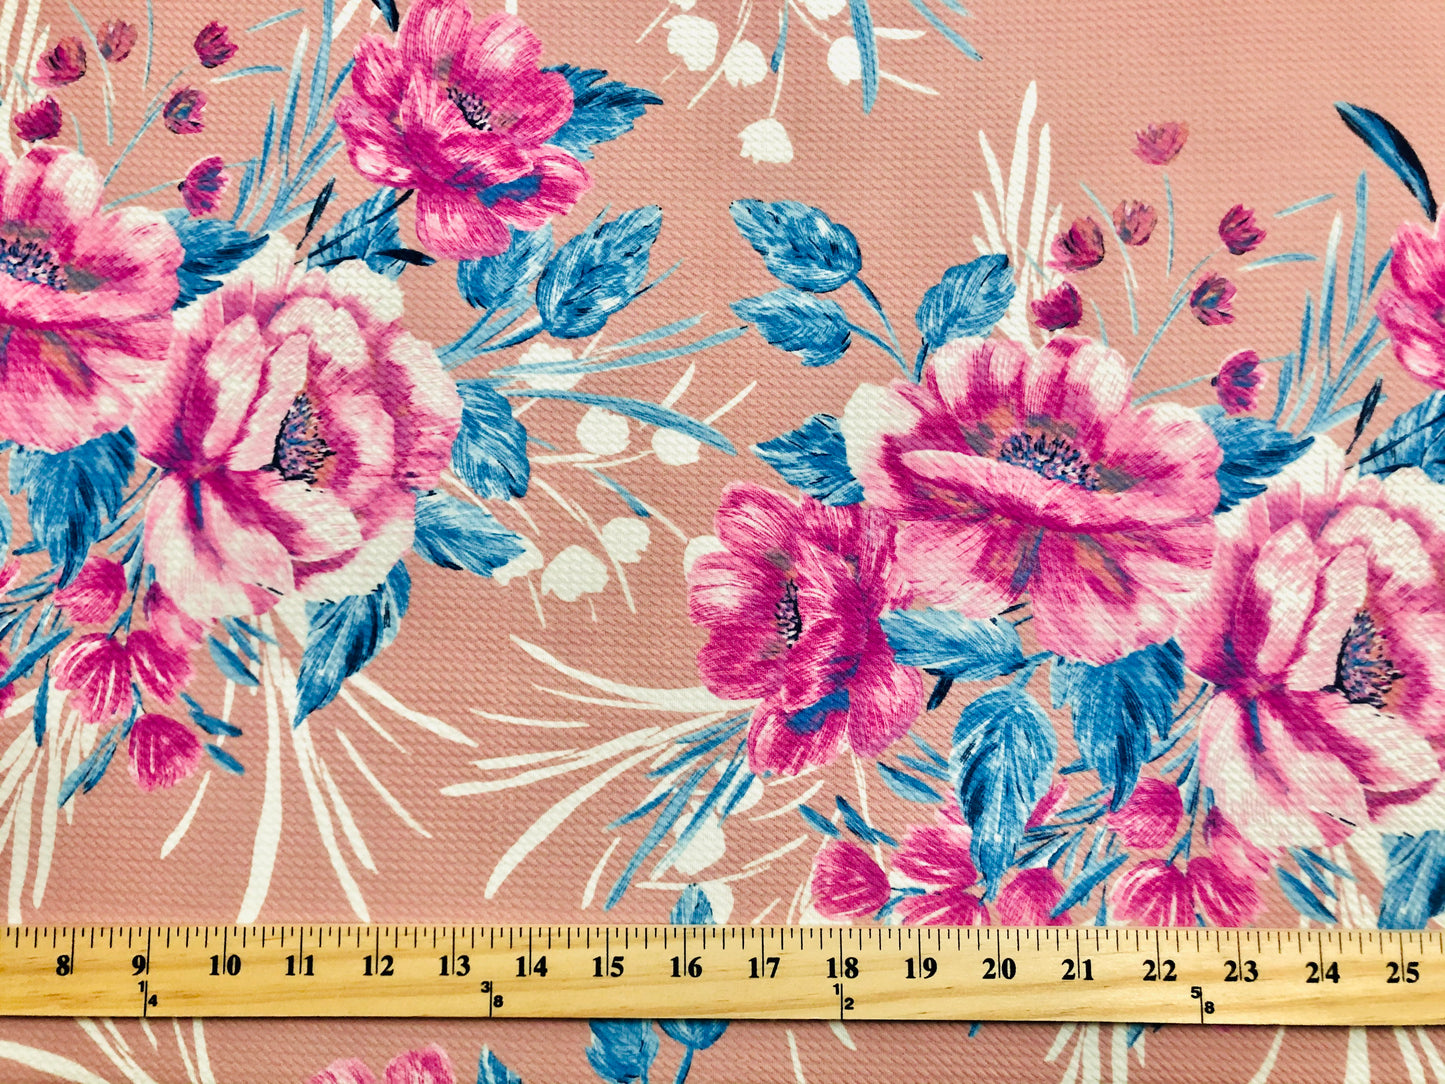 Bullet Knit Printed Fabric-Peach Magenta Blue Carnations-BPR226-Sold by the Yard